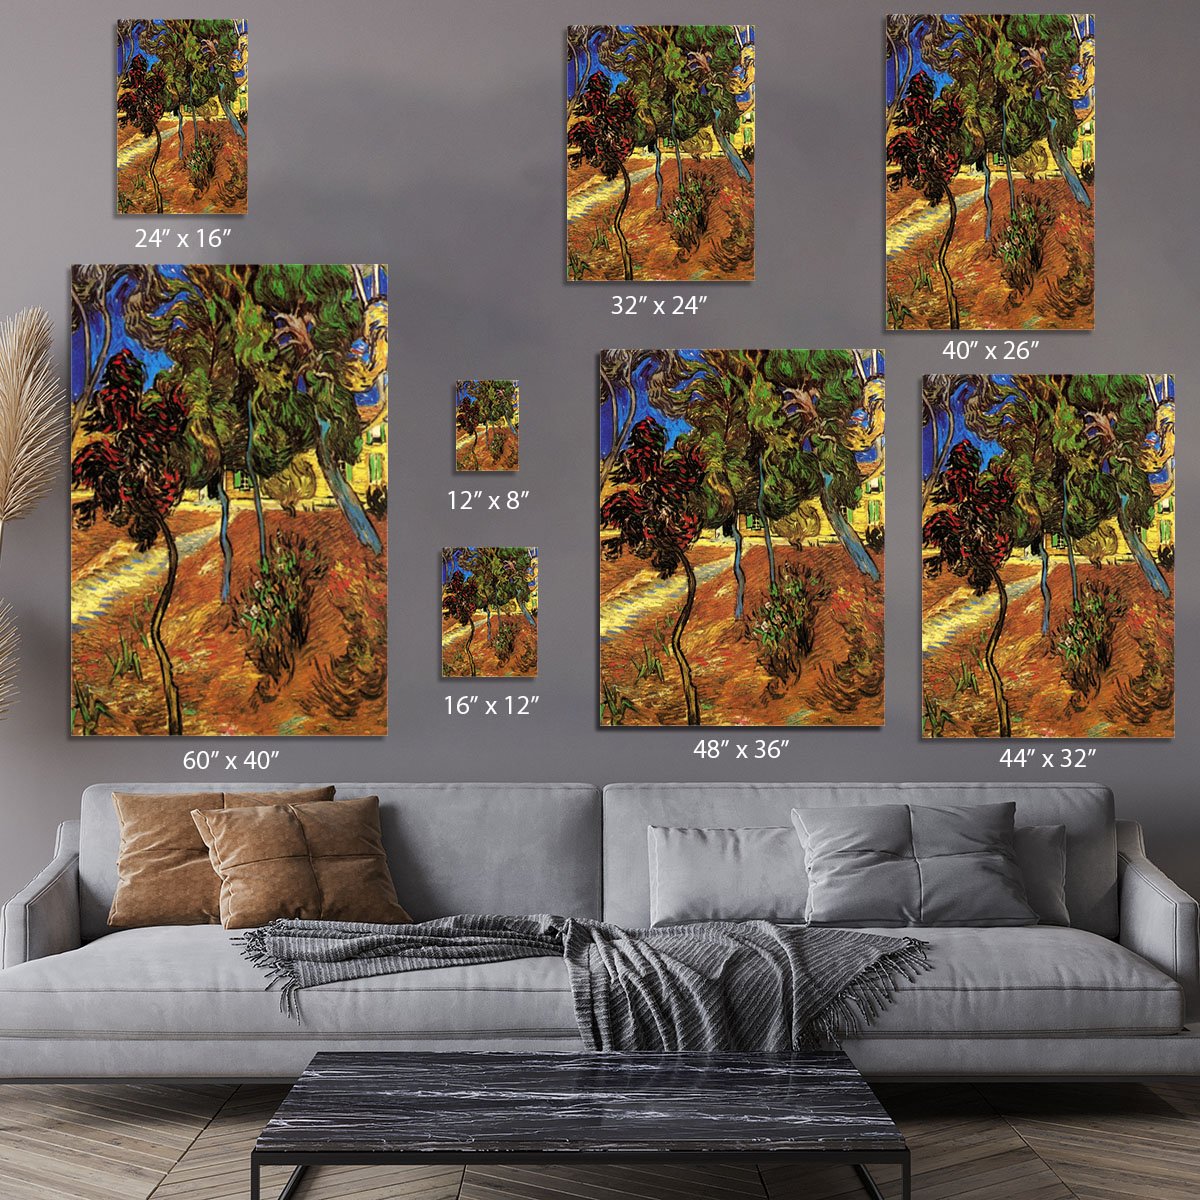 Trees in the Garden of Saint-Paul Hospital 2 by Van Gogh Canvas Print or Poster